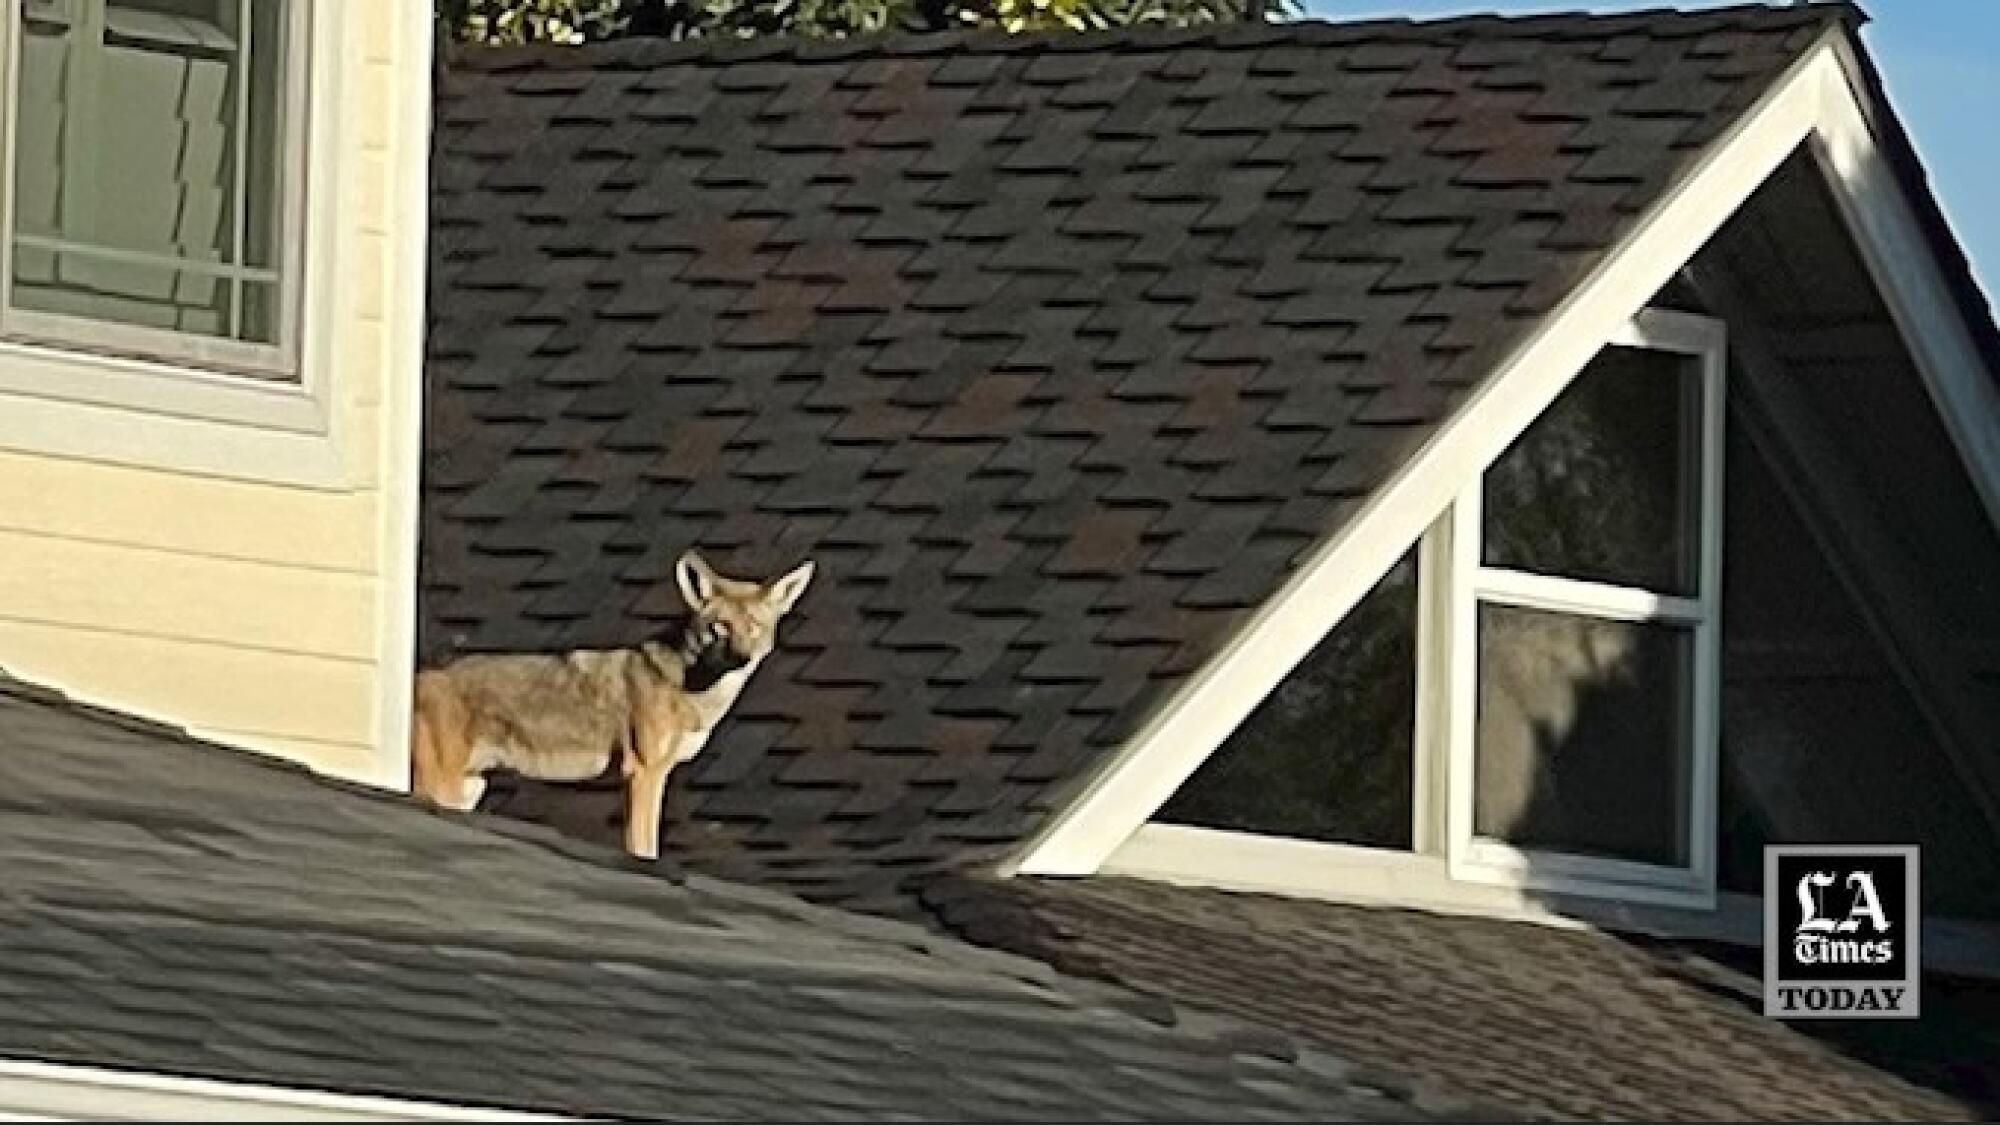 Coyotes aren't a nuisance. Humans live in their world - Los Angeles Times